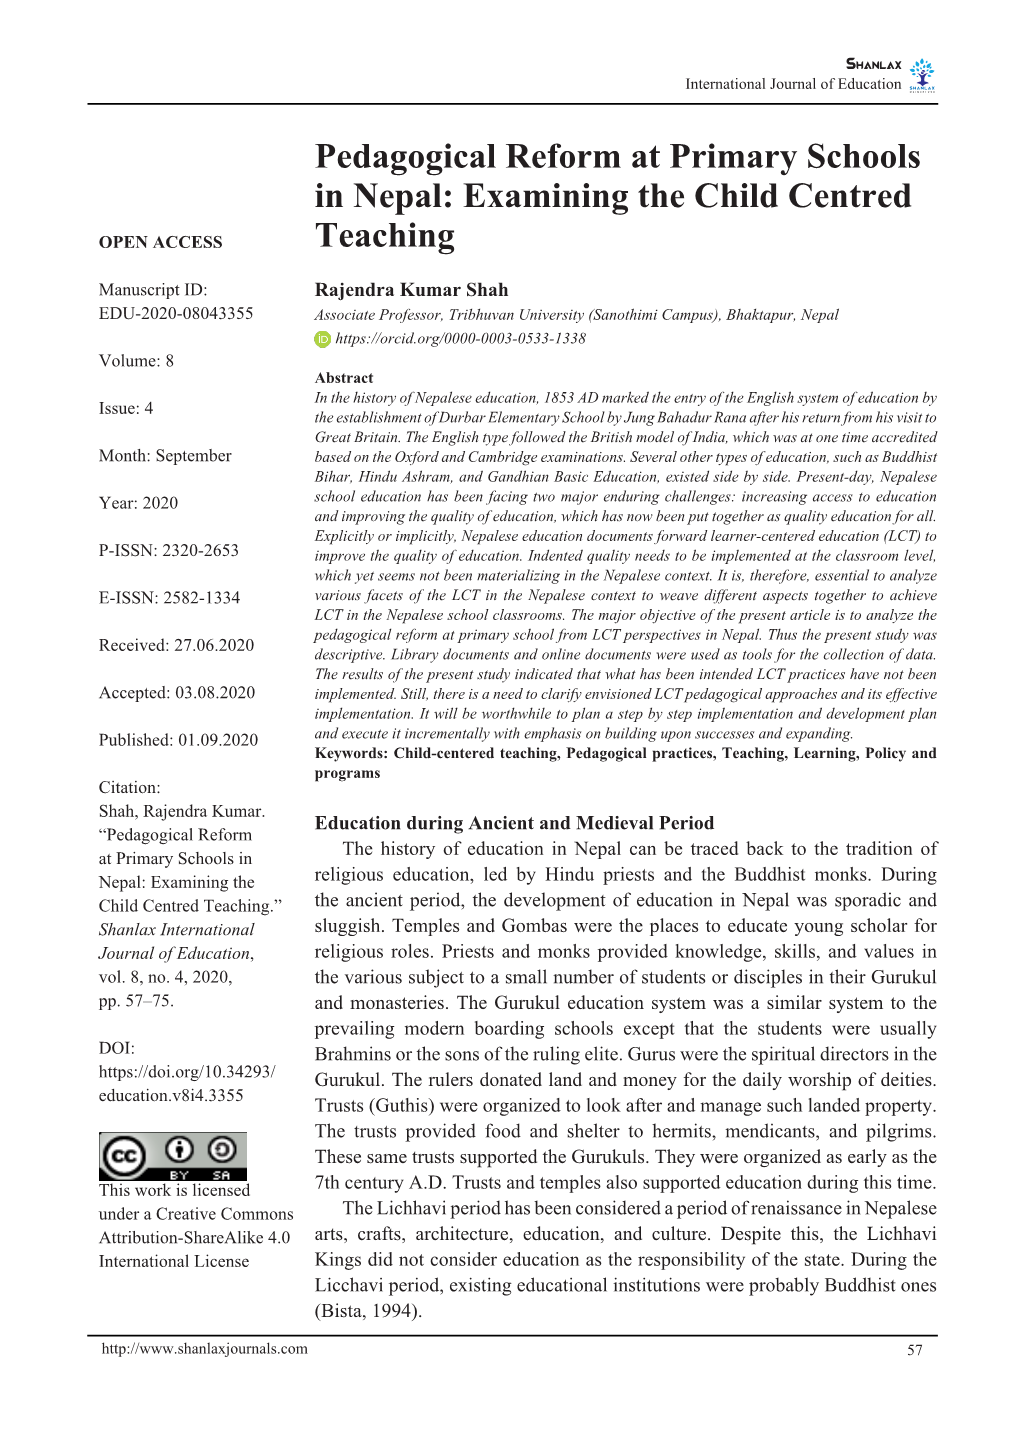 Pedagogical Reform at Primary Schools in Nepal: Examining the Child Centred Teaching